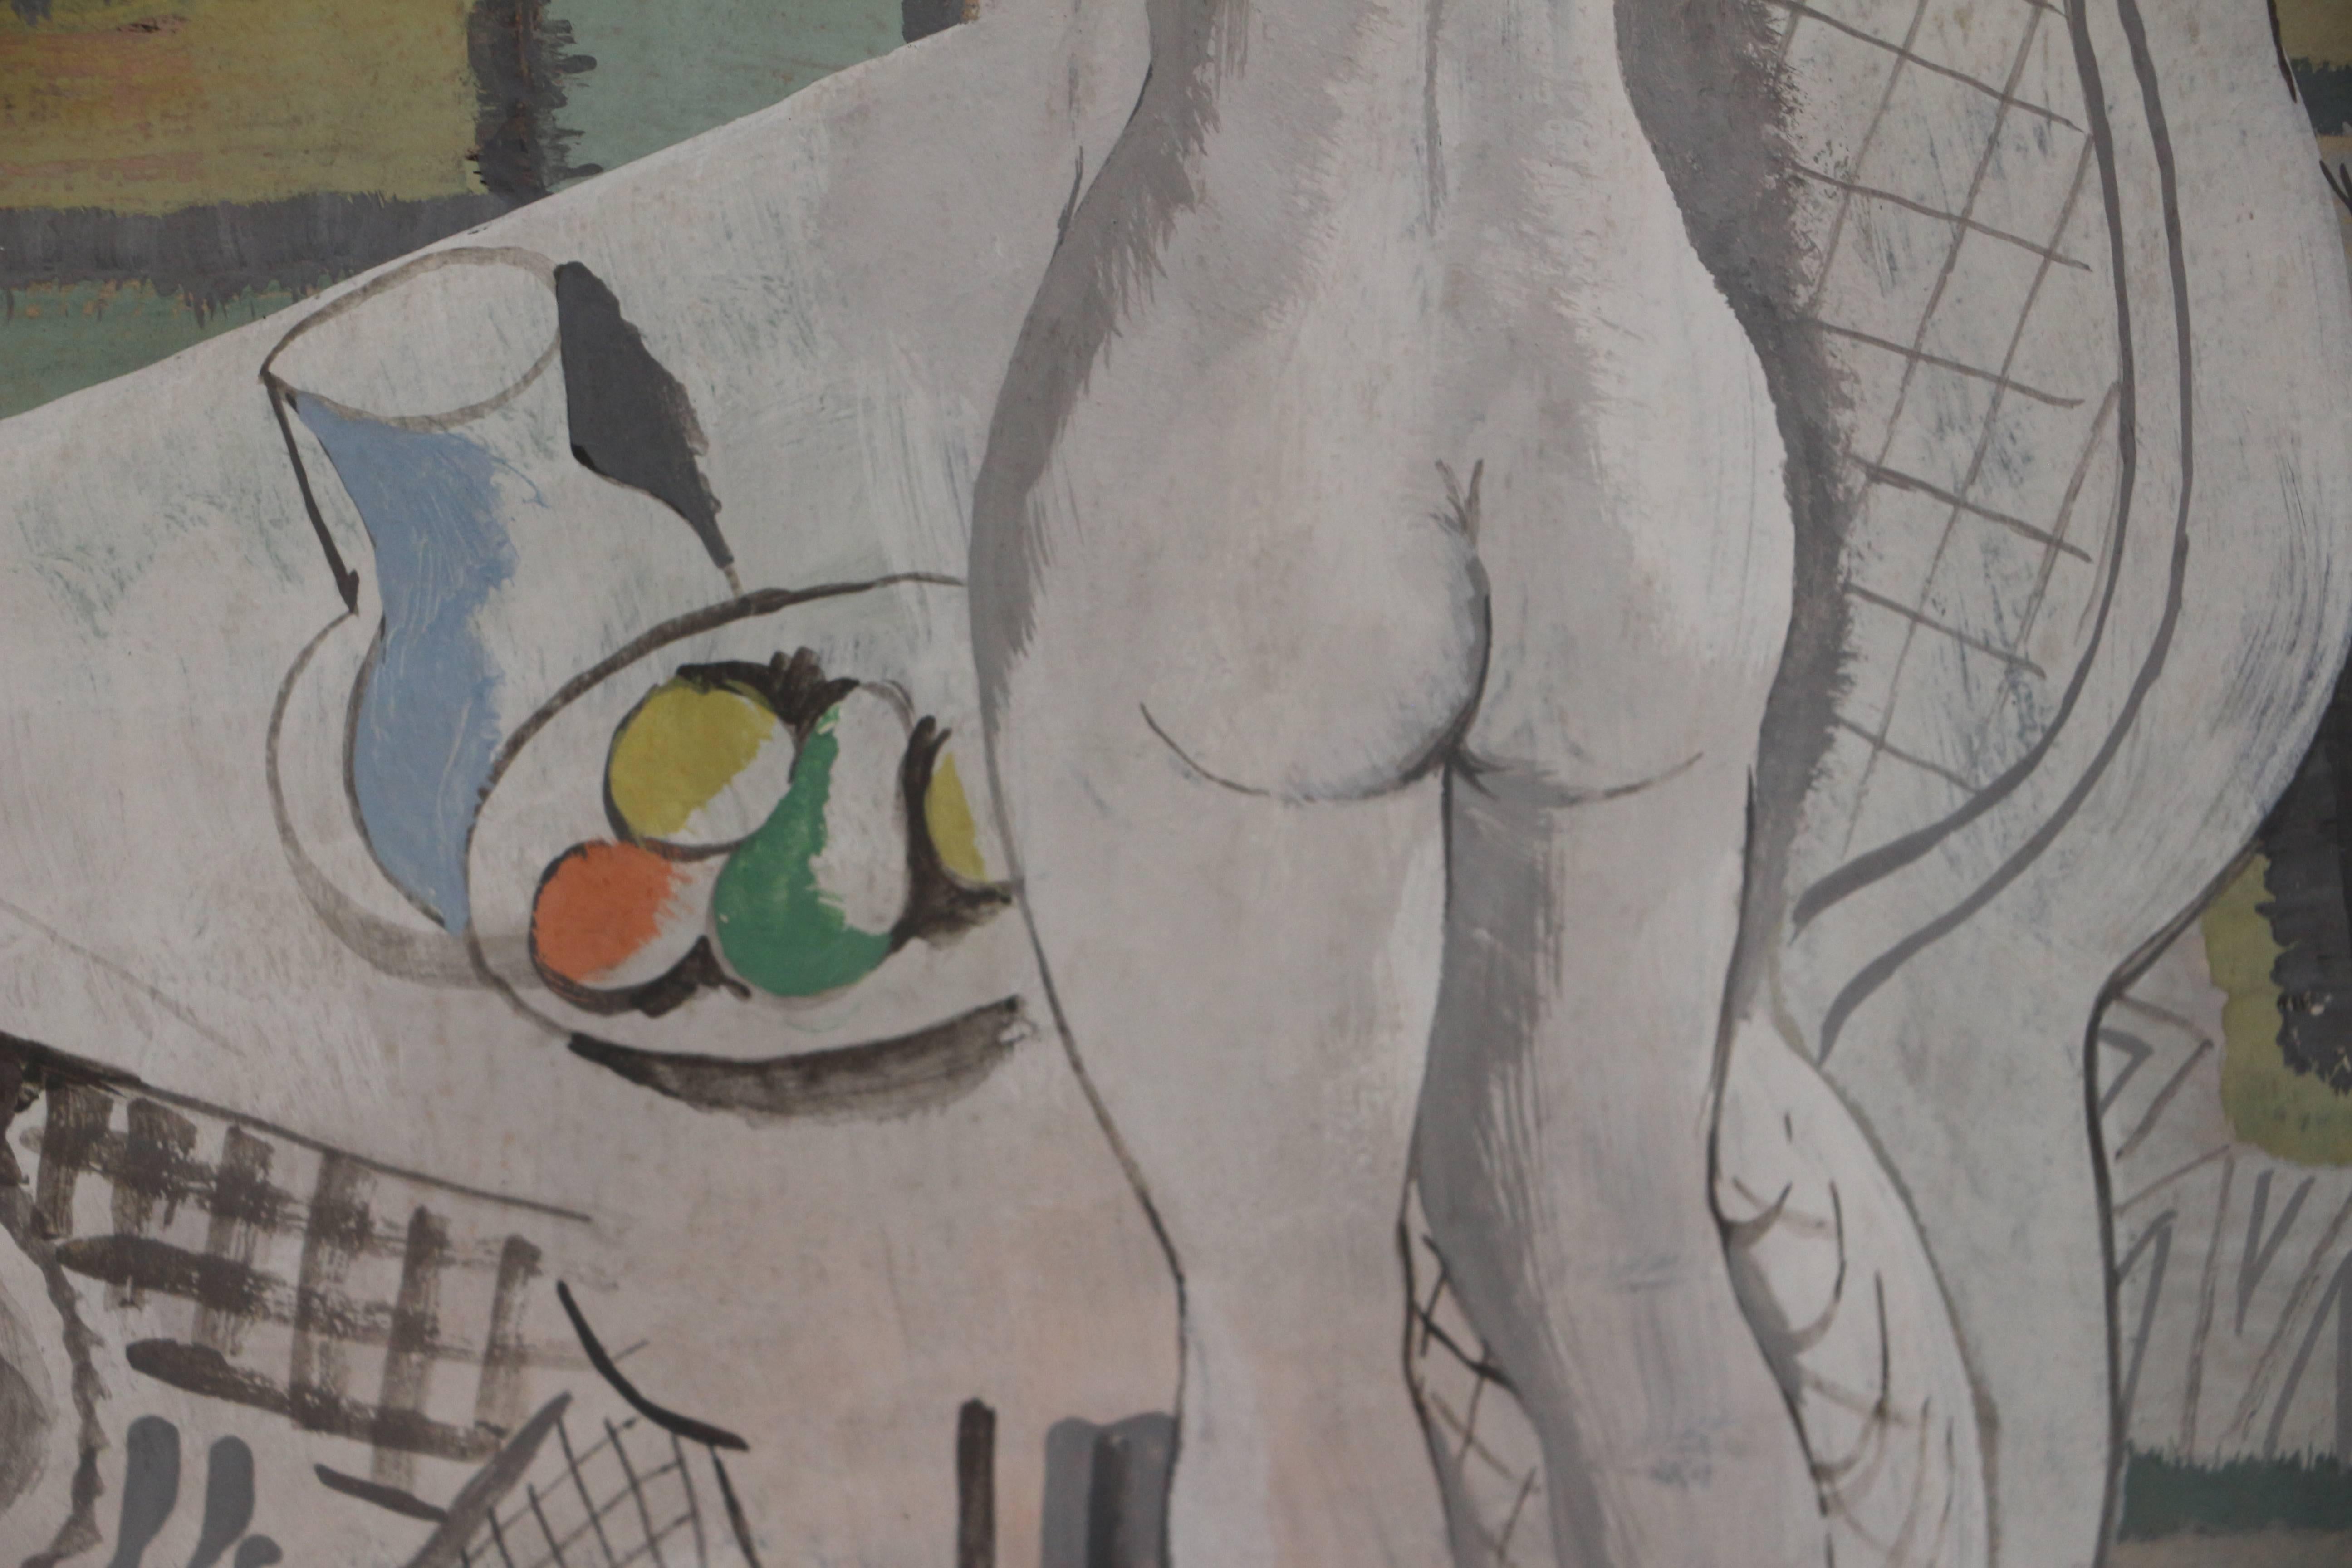 This original gouache on paper composition depicts the back side of a nude female with raised arms in front of a table with a bowl of fruit. The composition is in the Cubist style and displays colorful and geometric patterns in the background.